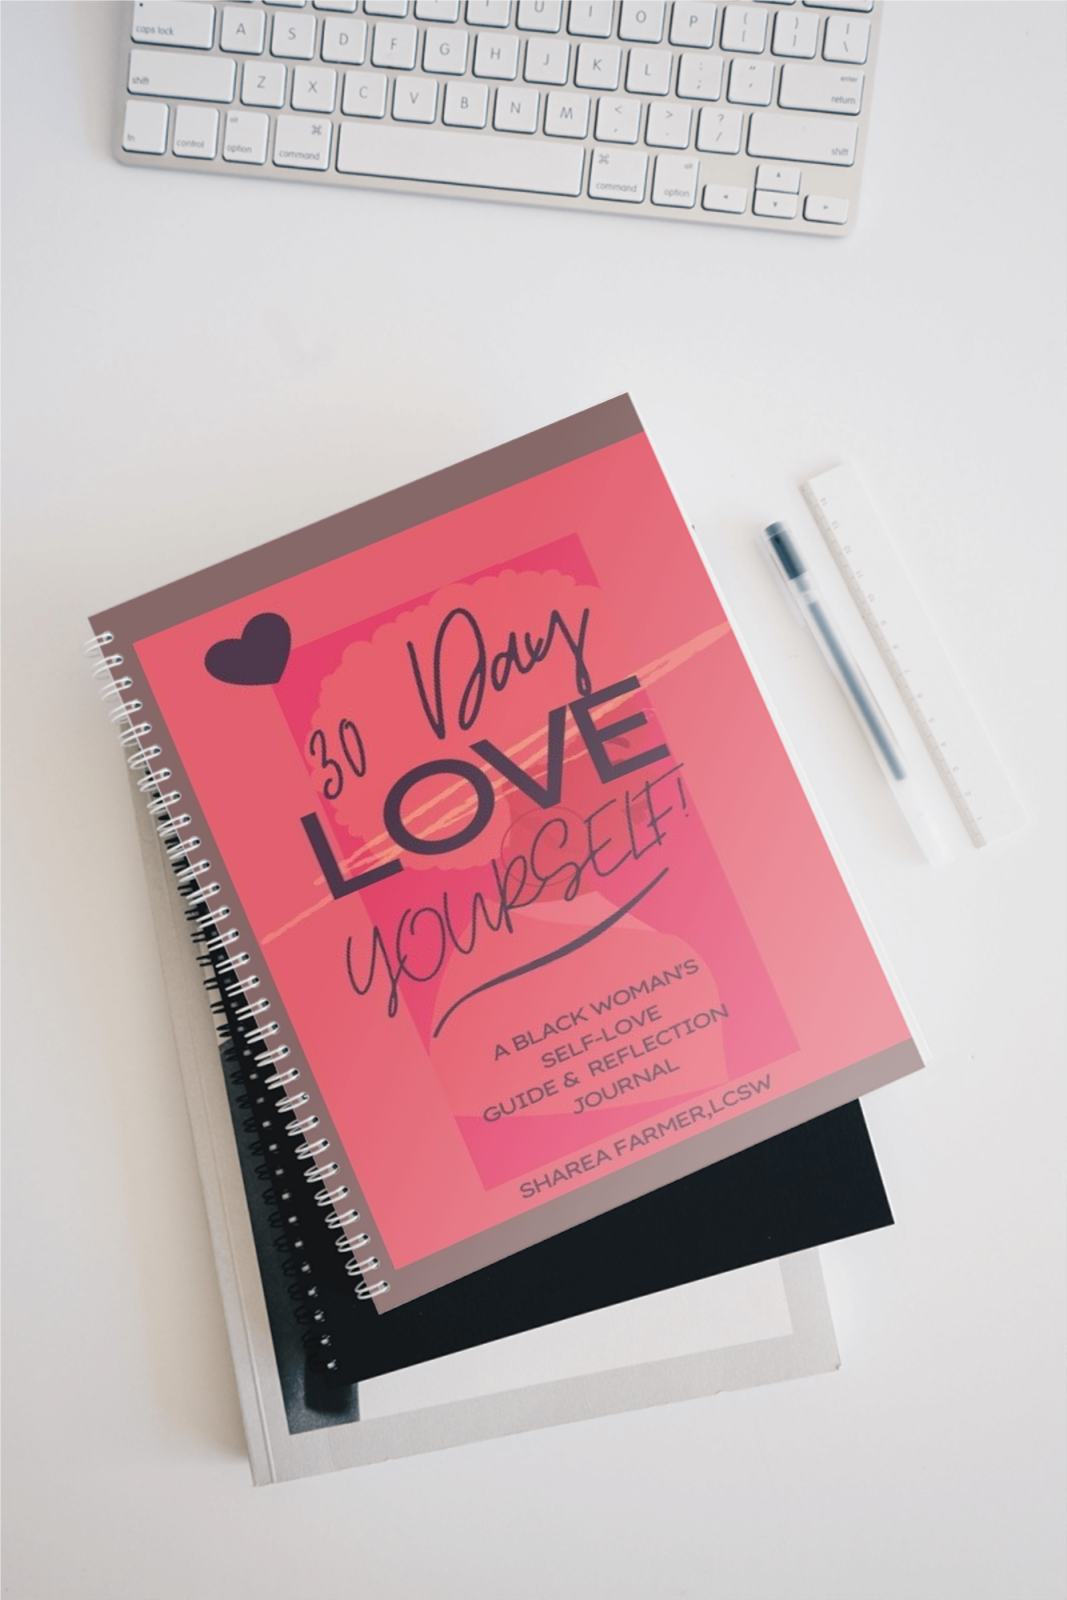 30 Day Love Yourself: A Black Woman's Self-Love Guide & Reflection Journal